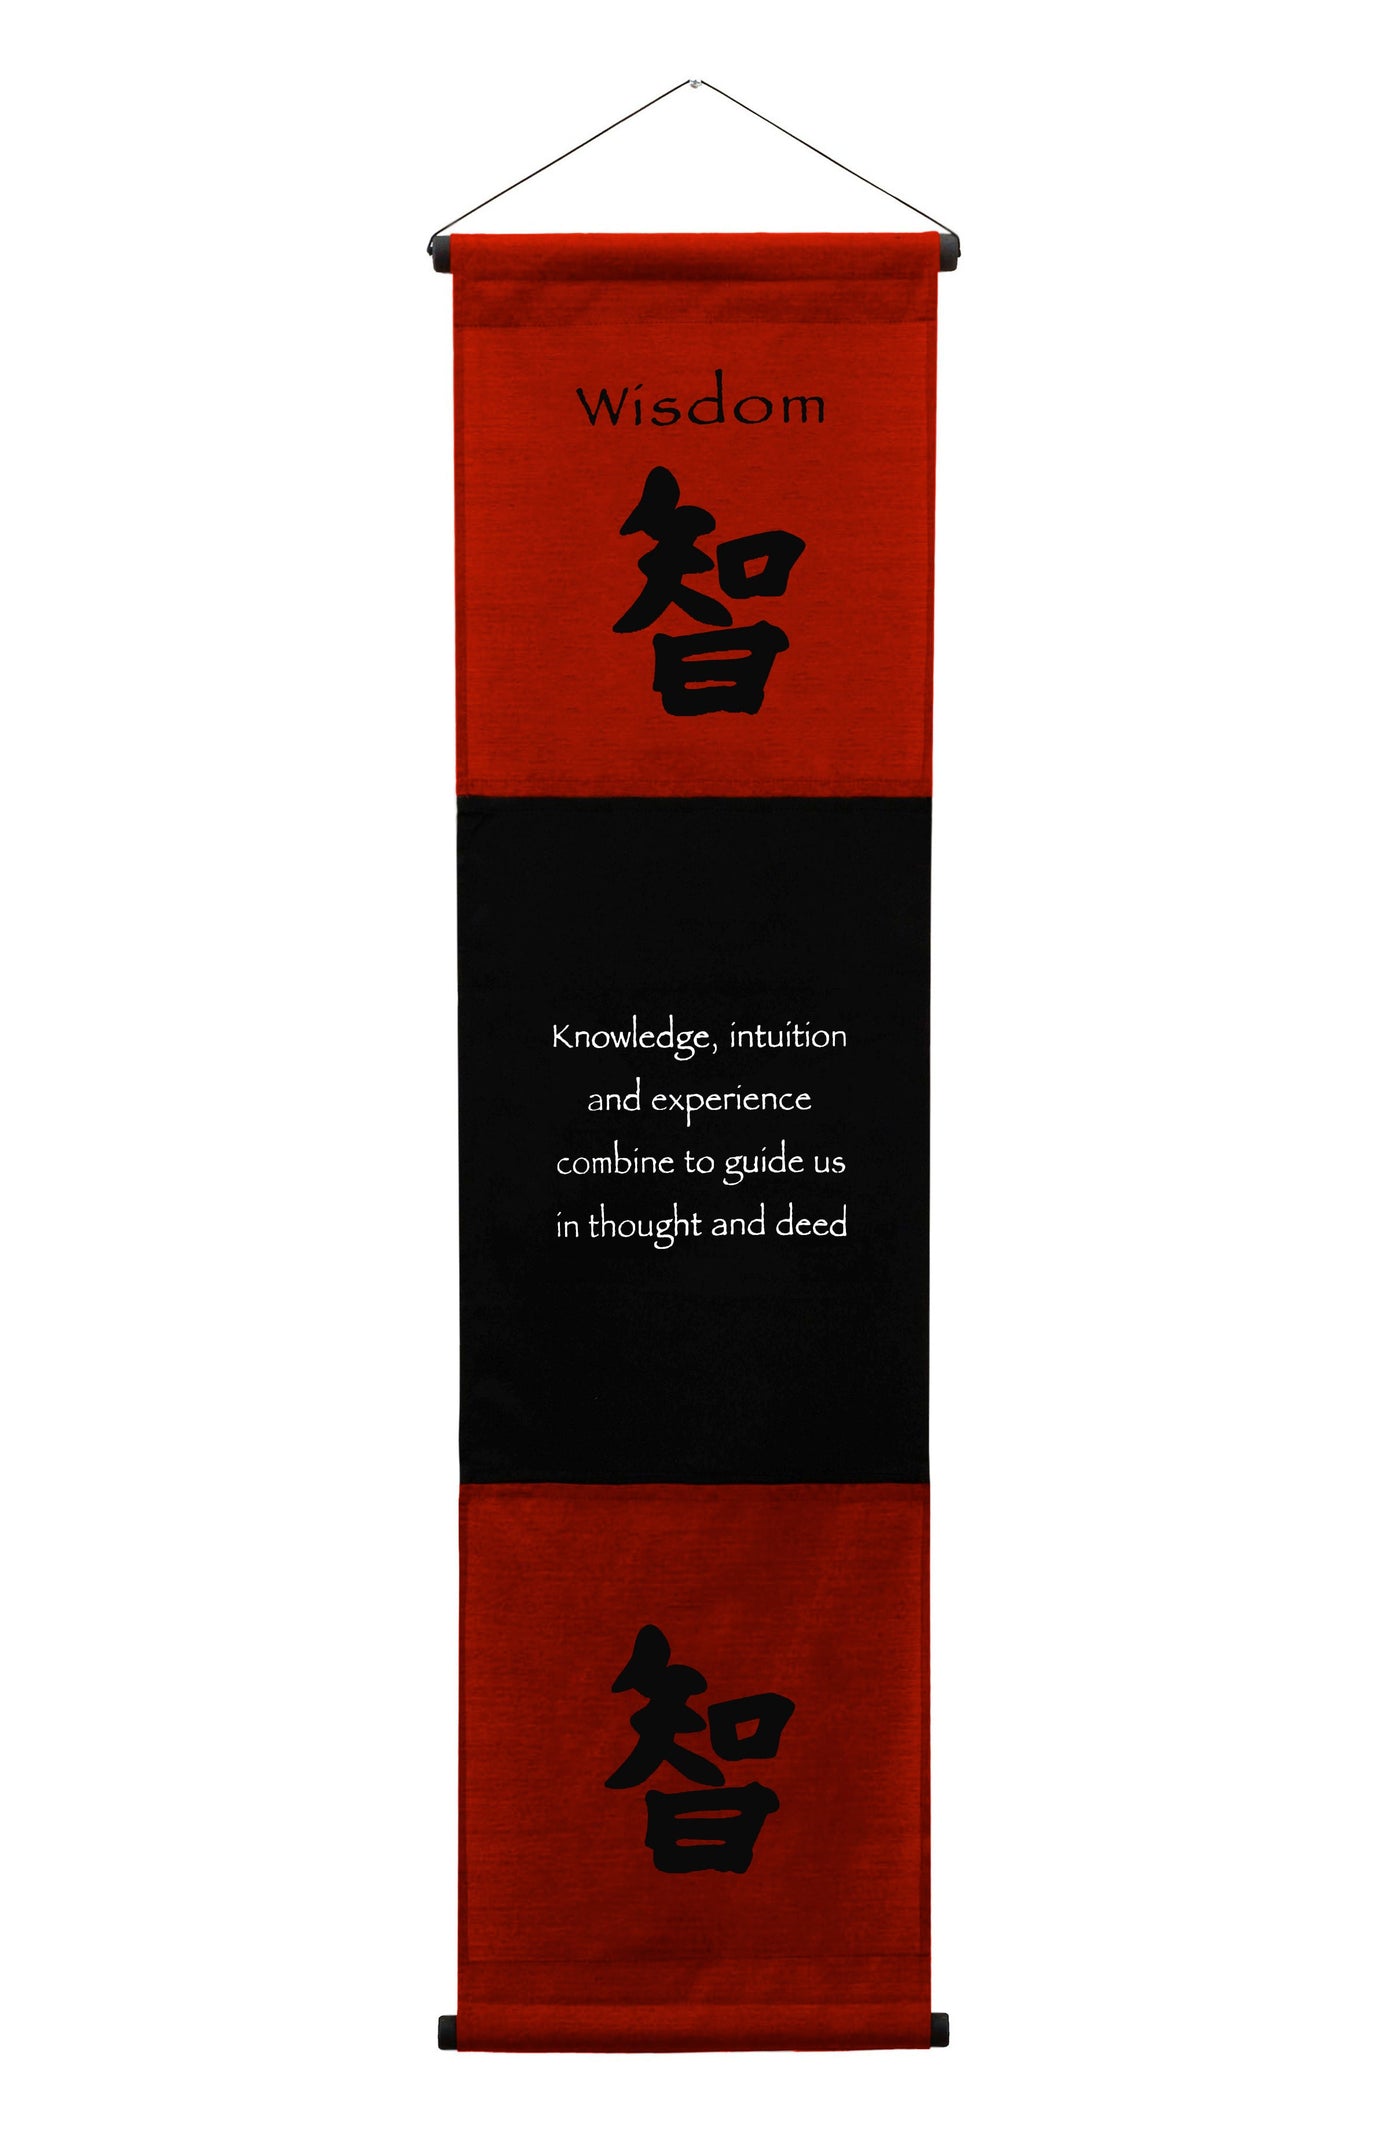 Inspirational Wall Decor "Wisdom" Banner Large, Inspiring Quote Wall Hanging Scroll, Affirmation Motivational Uplifting Art Decoration, Thought Saying Tapestry red